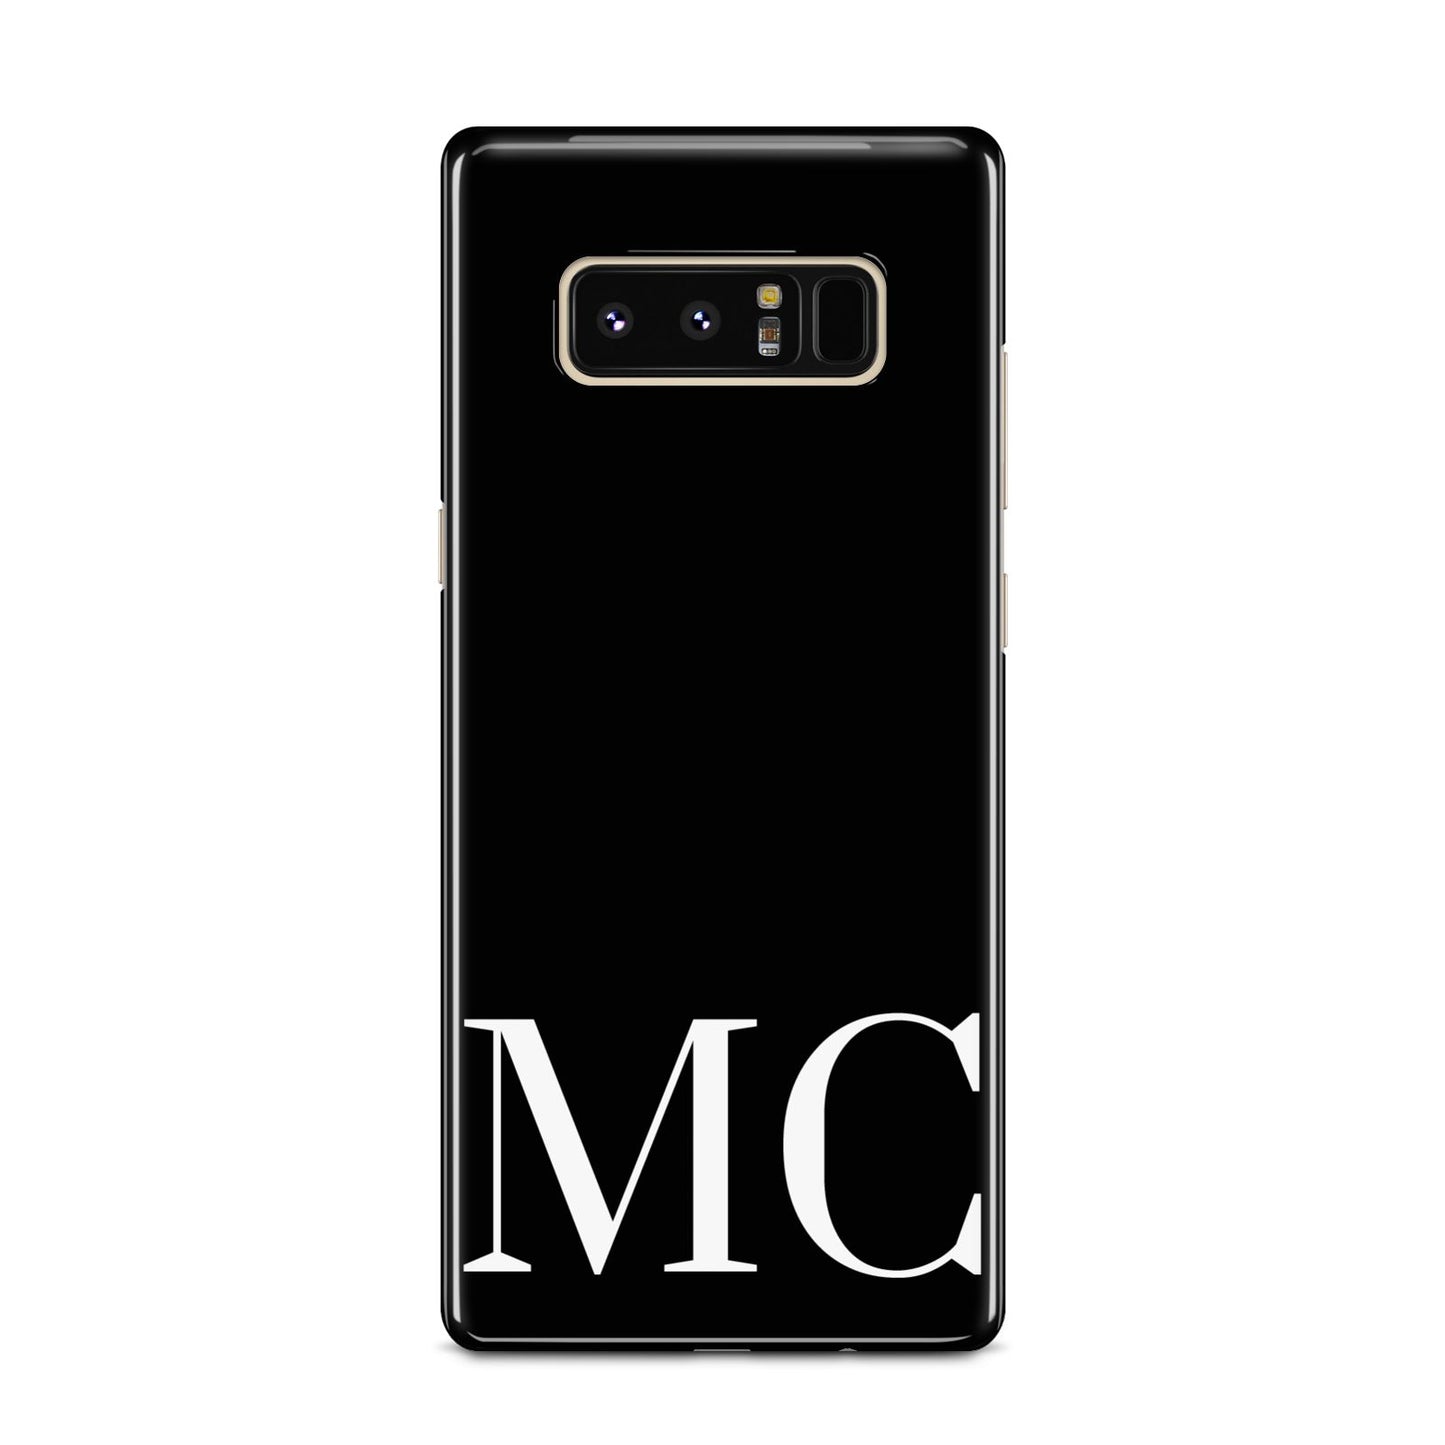 Initials Personalised 1 Samsung Galaxy Note 8 Case